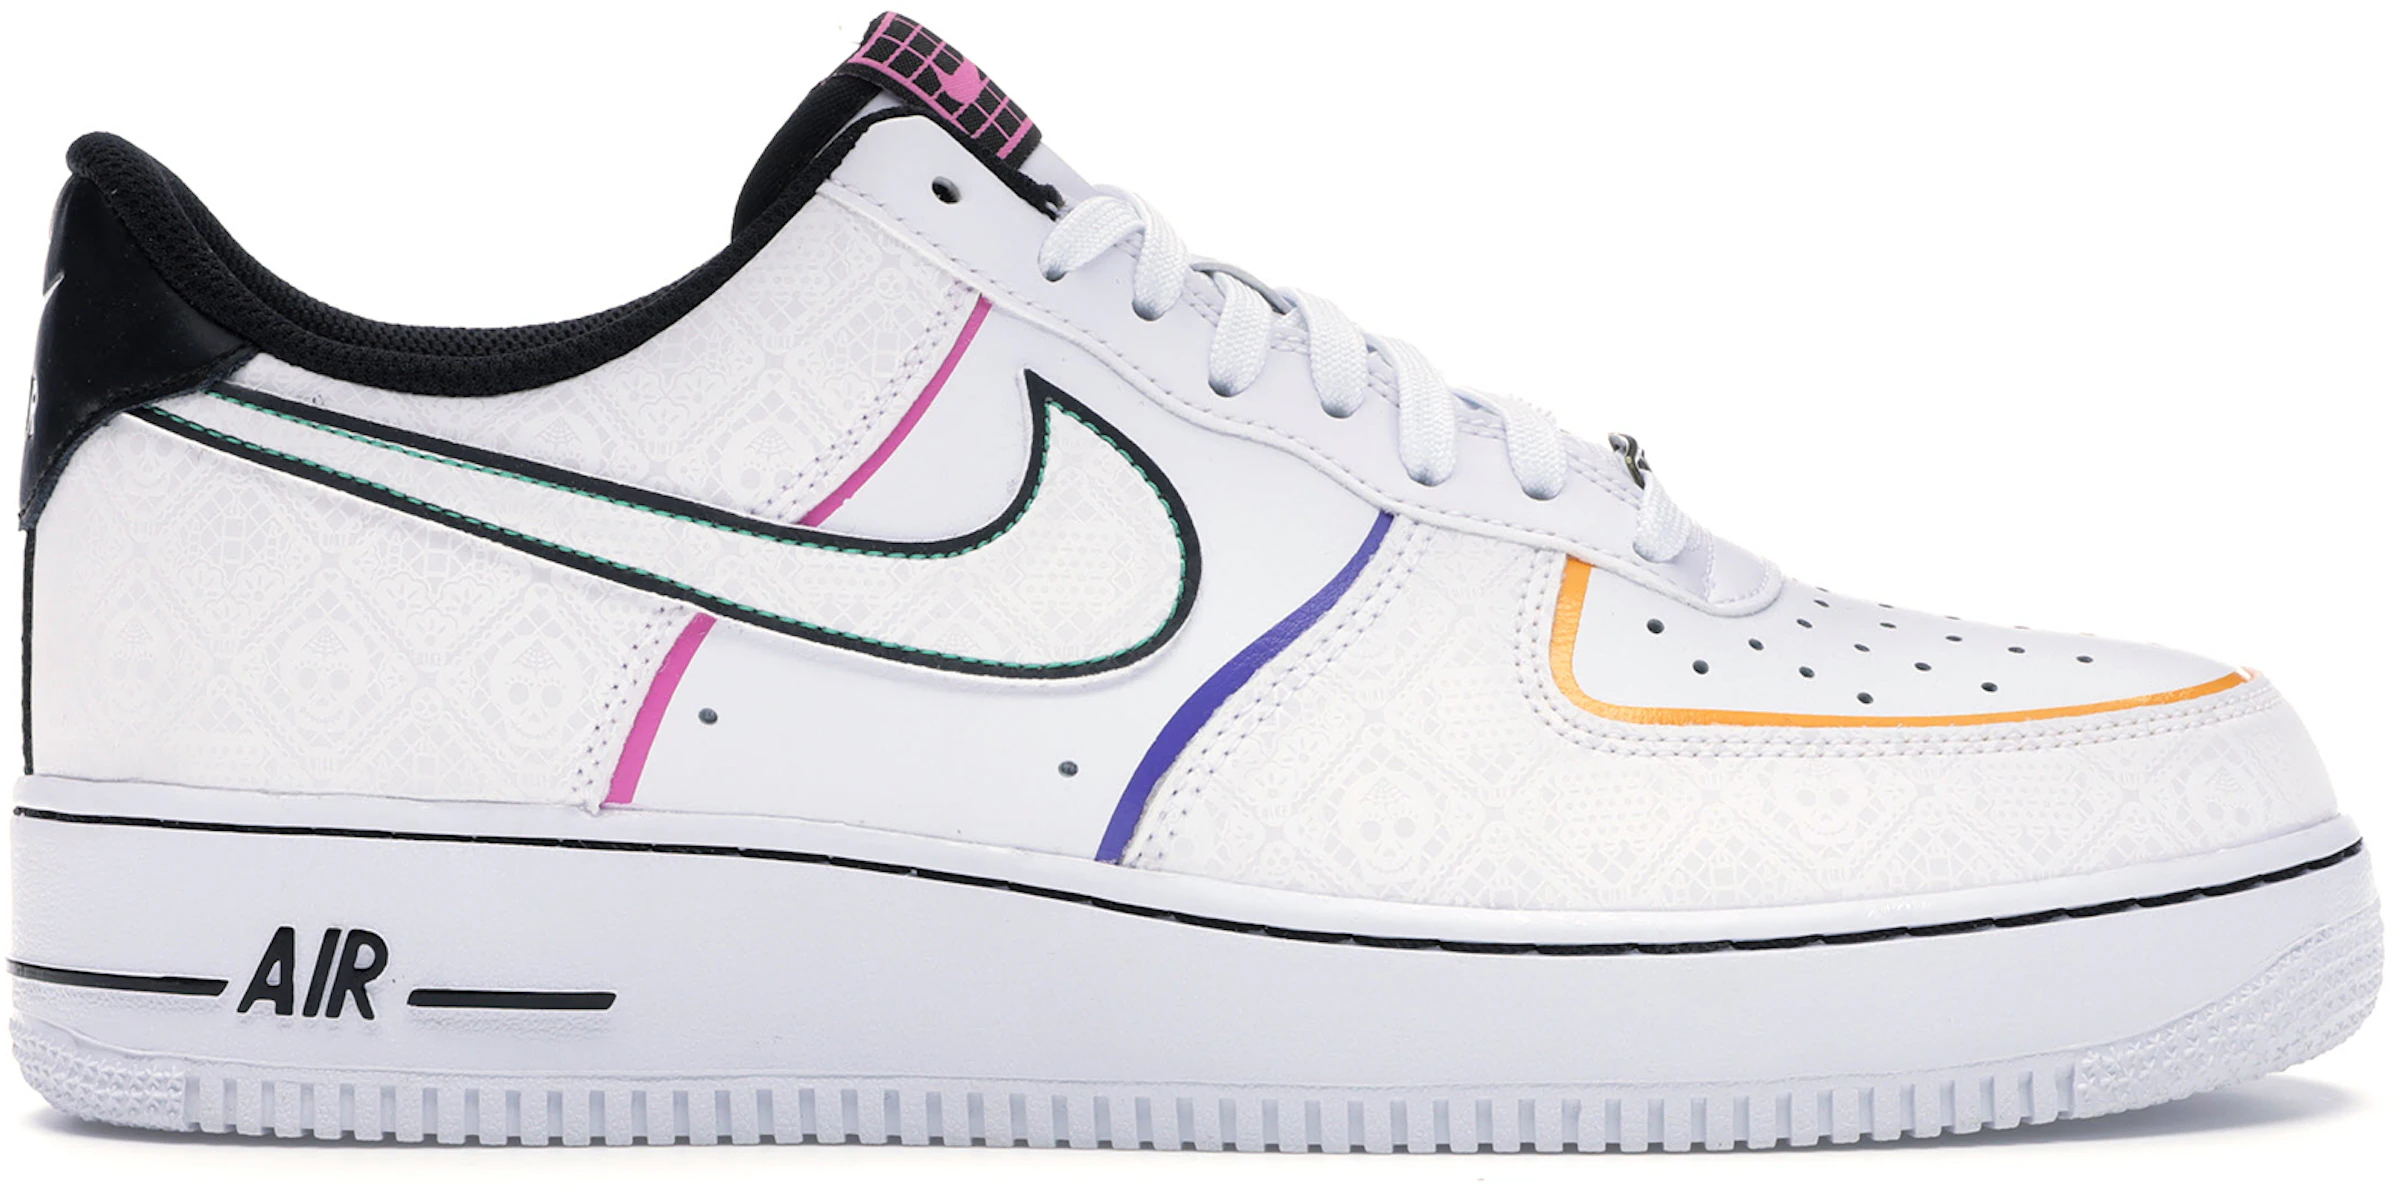 Air Force 1 Low Day of the Dead (2019) - CT1138-100 - MX